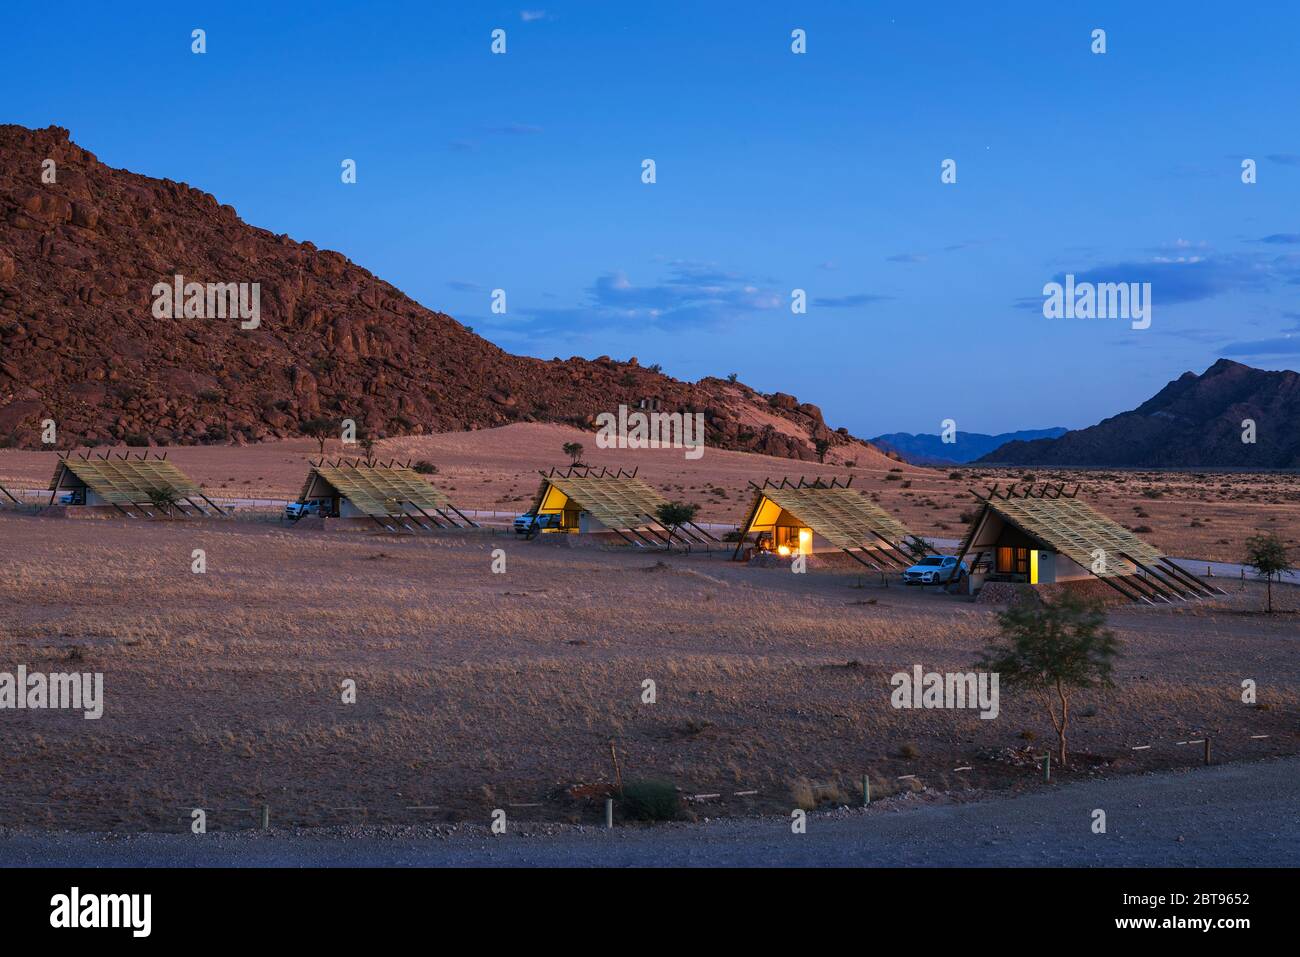 Evening at small chalets of a desert lodge near Sossusvlei in Namibia Stock Photo